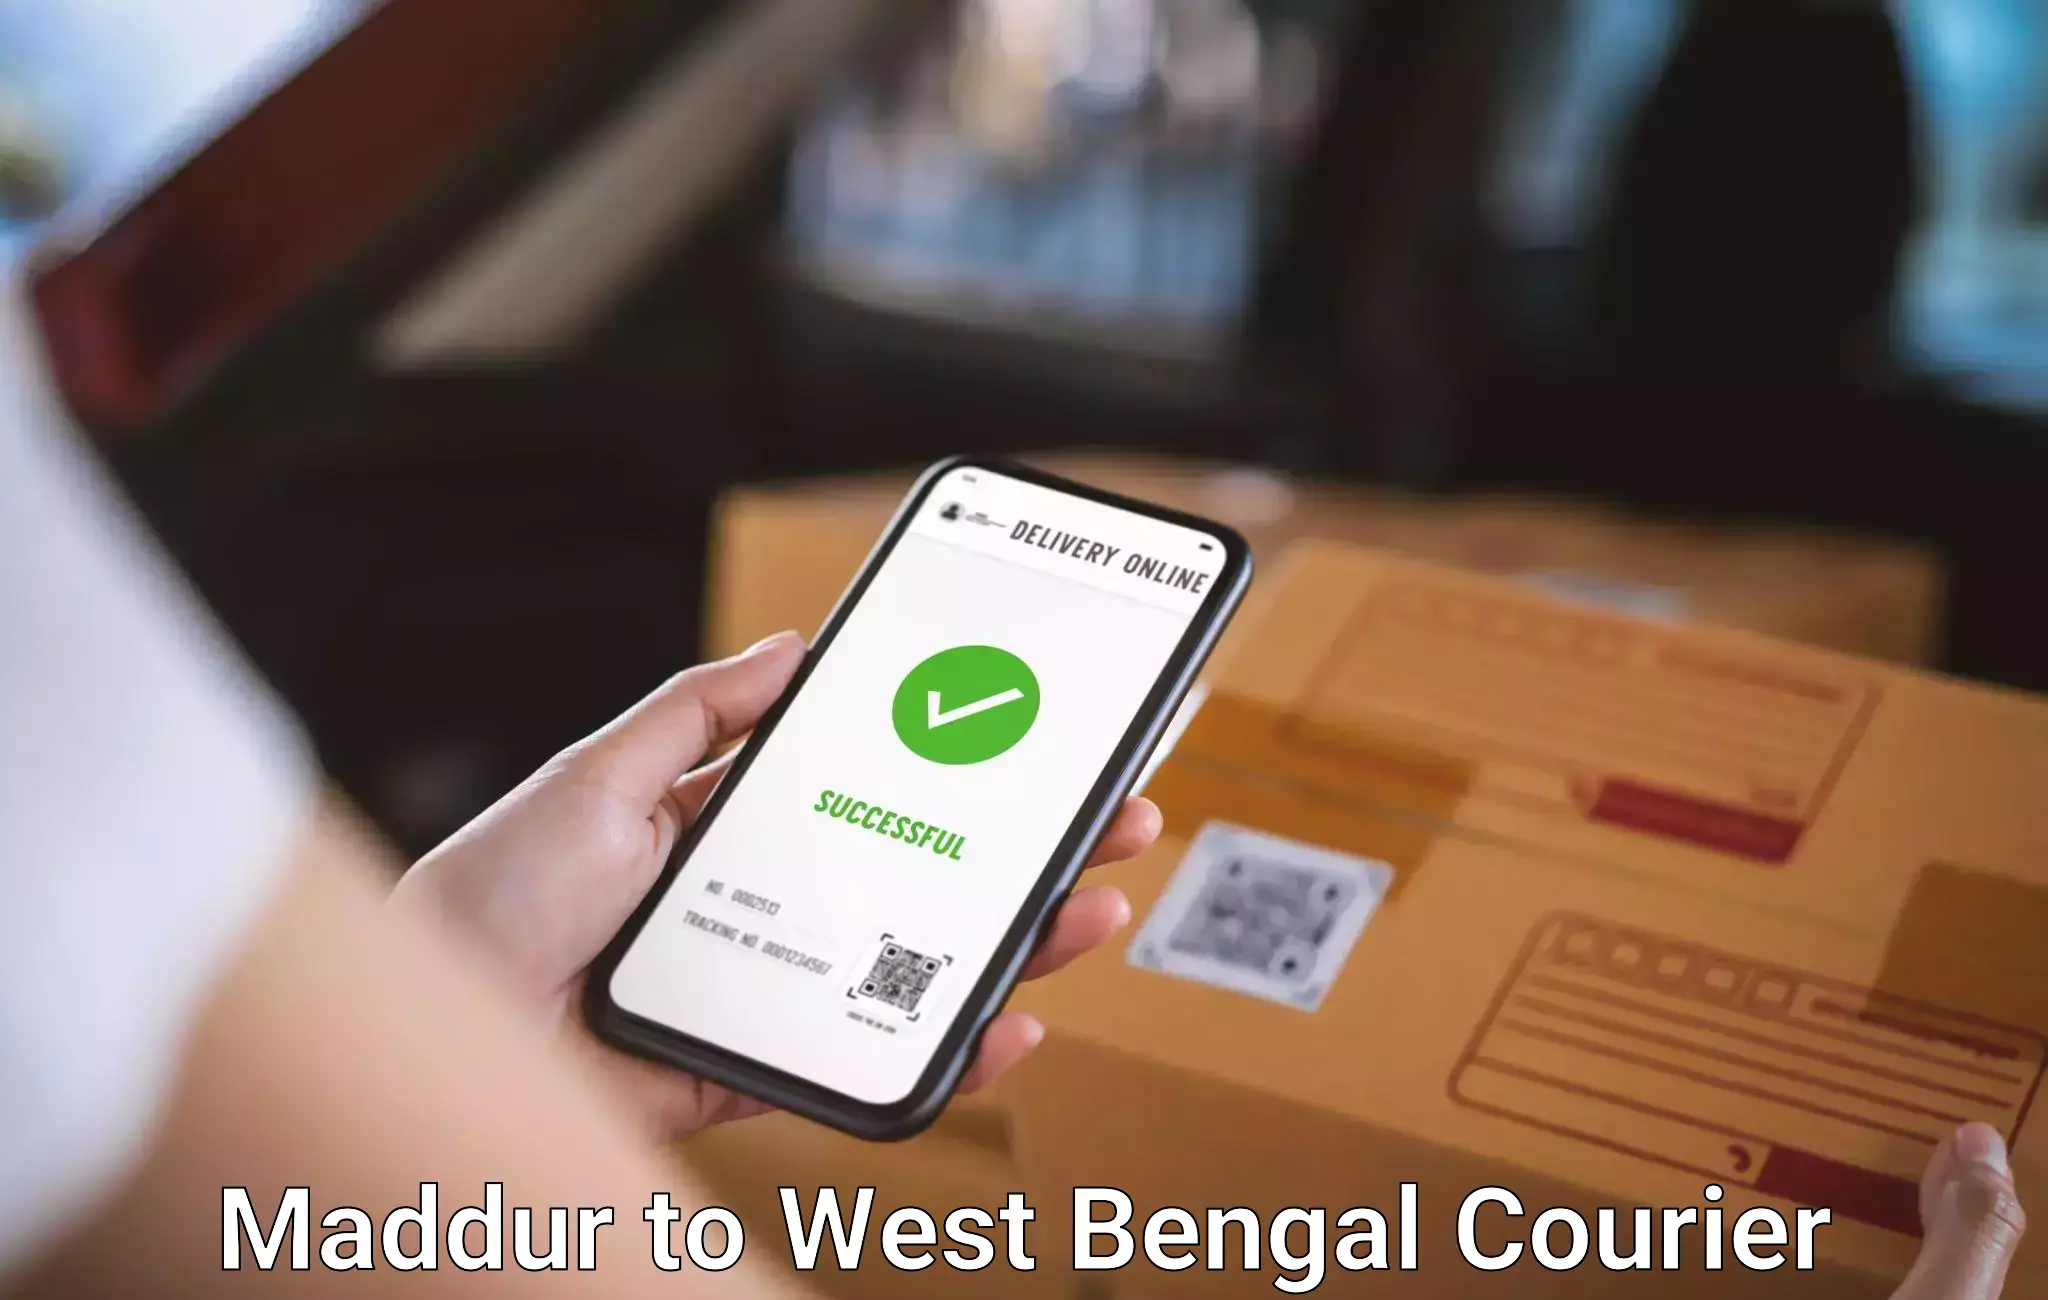 Luggage transport company Maddur to West Bengal